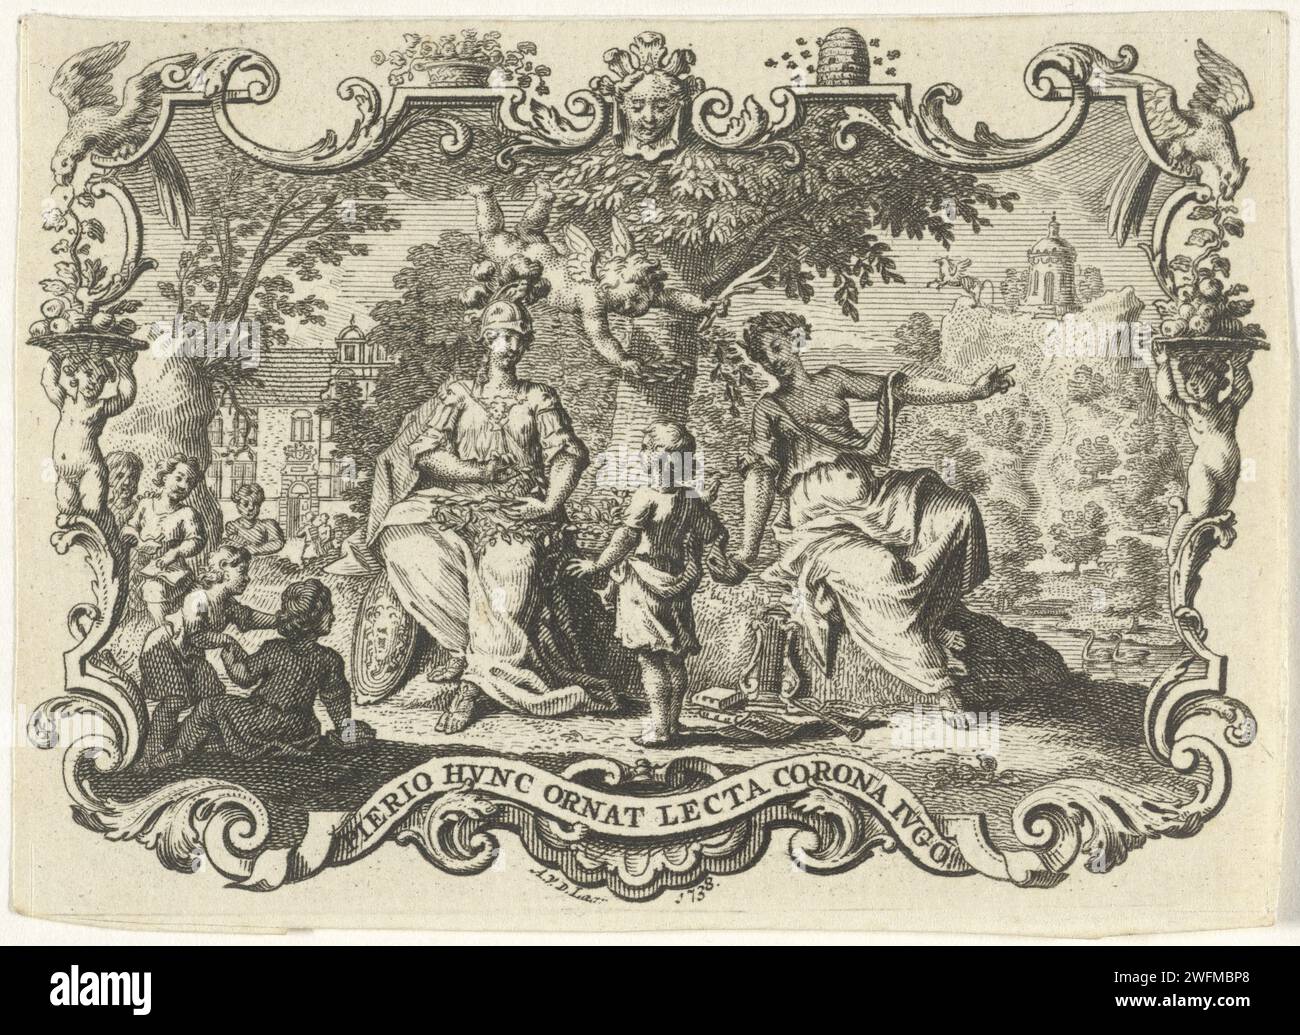 Boy by Minerva Lawered, Adolf van der Laan, 1738 print In the presence of putti and a muse, a boy is honored by Minerva. The laurel wreath is led in the air by a putto. In the distance on the right Pegasus on Mount Helicon. The show is caught is a graceful list of motifs of plants, animals and fruits.  paper etching (story of) Minerva (Pallas, Athena). single Muses. crowning with laurel. cupids: 'amores', 'amoretti', 'putti'. Pegasus, the winged horse Stock Photo